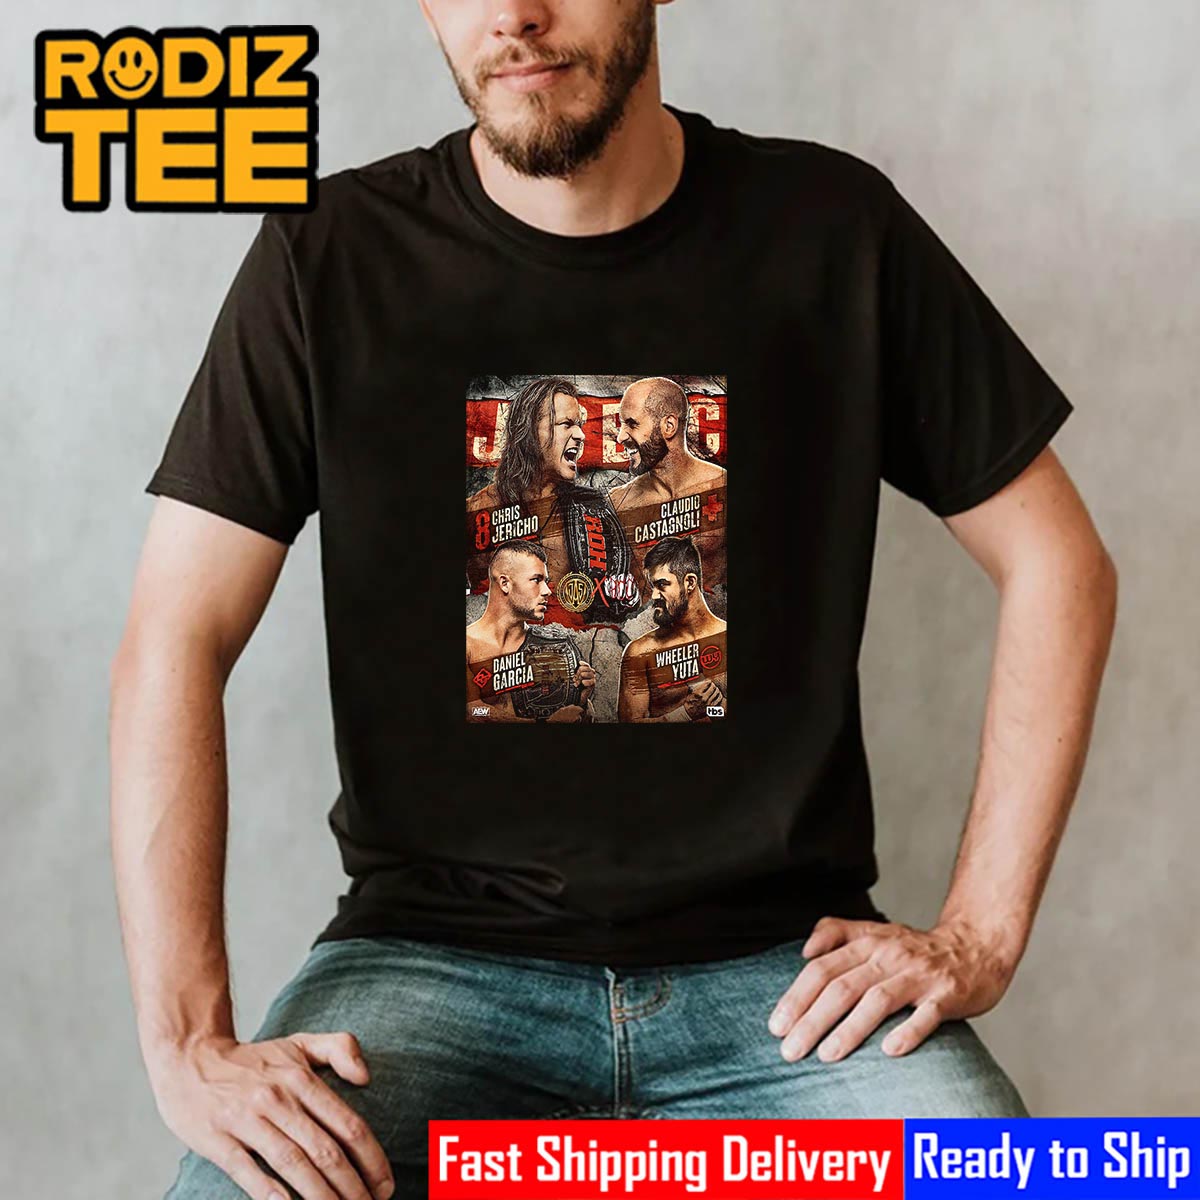 ROH Pure Champ And ROH World Champ At AEW Dynamite Best T-Shirt